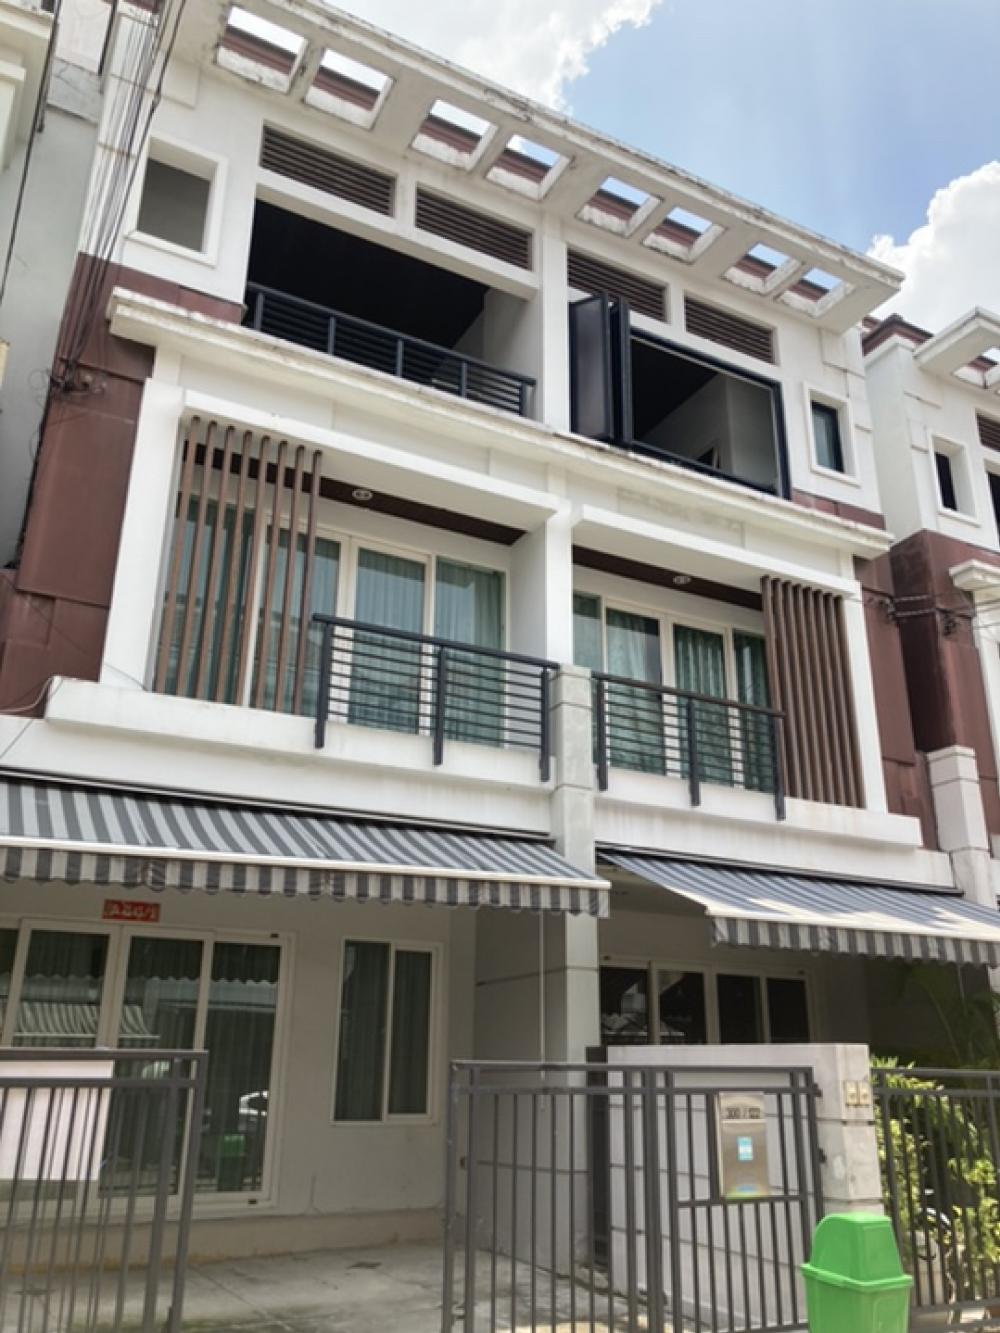 For RentTownhouseYothinpattana,CDC : 🏡LK193 3-storey townhome for rent, Baan Klang Muang project. Urbanion Rama 9-Ladprao, 3 bedrooms, 3 bathrooms, fully furnished, near Town in Town - only 30,000/month